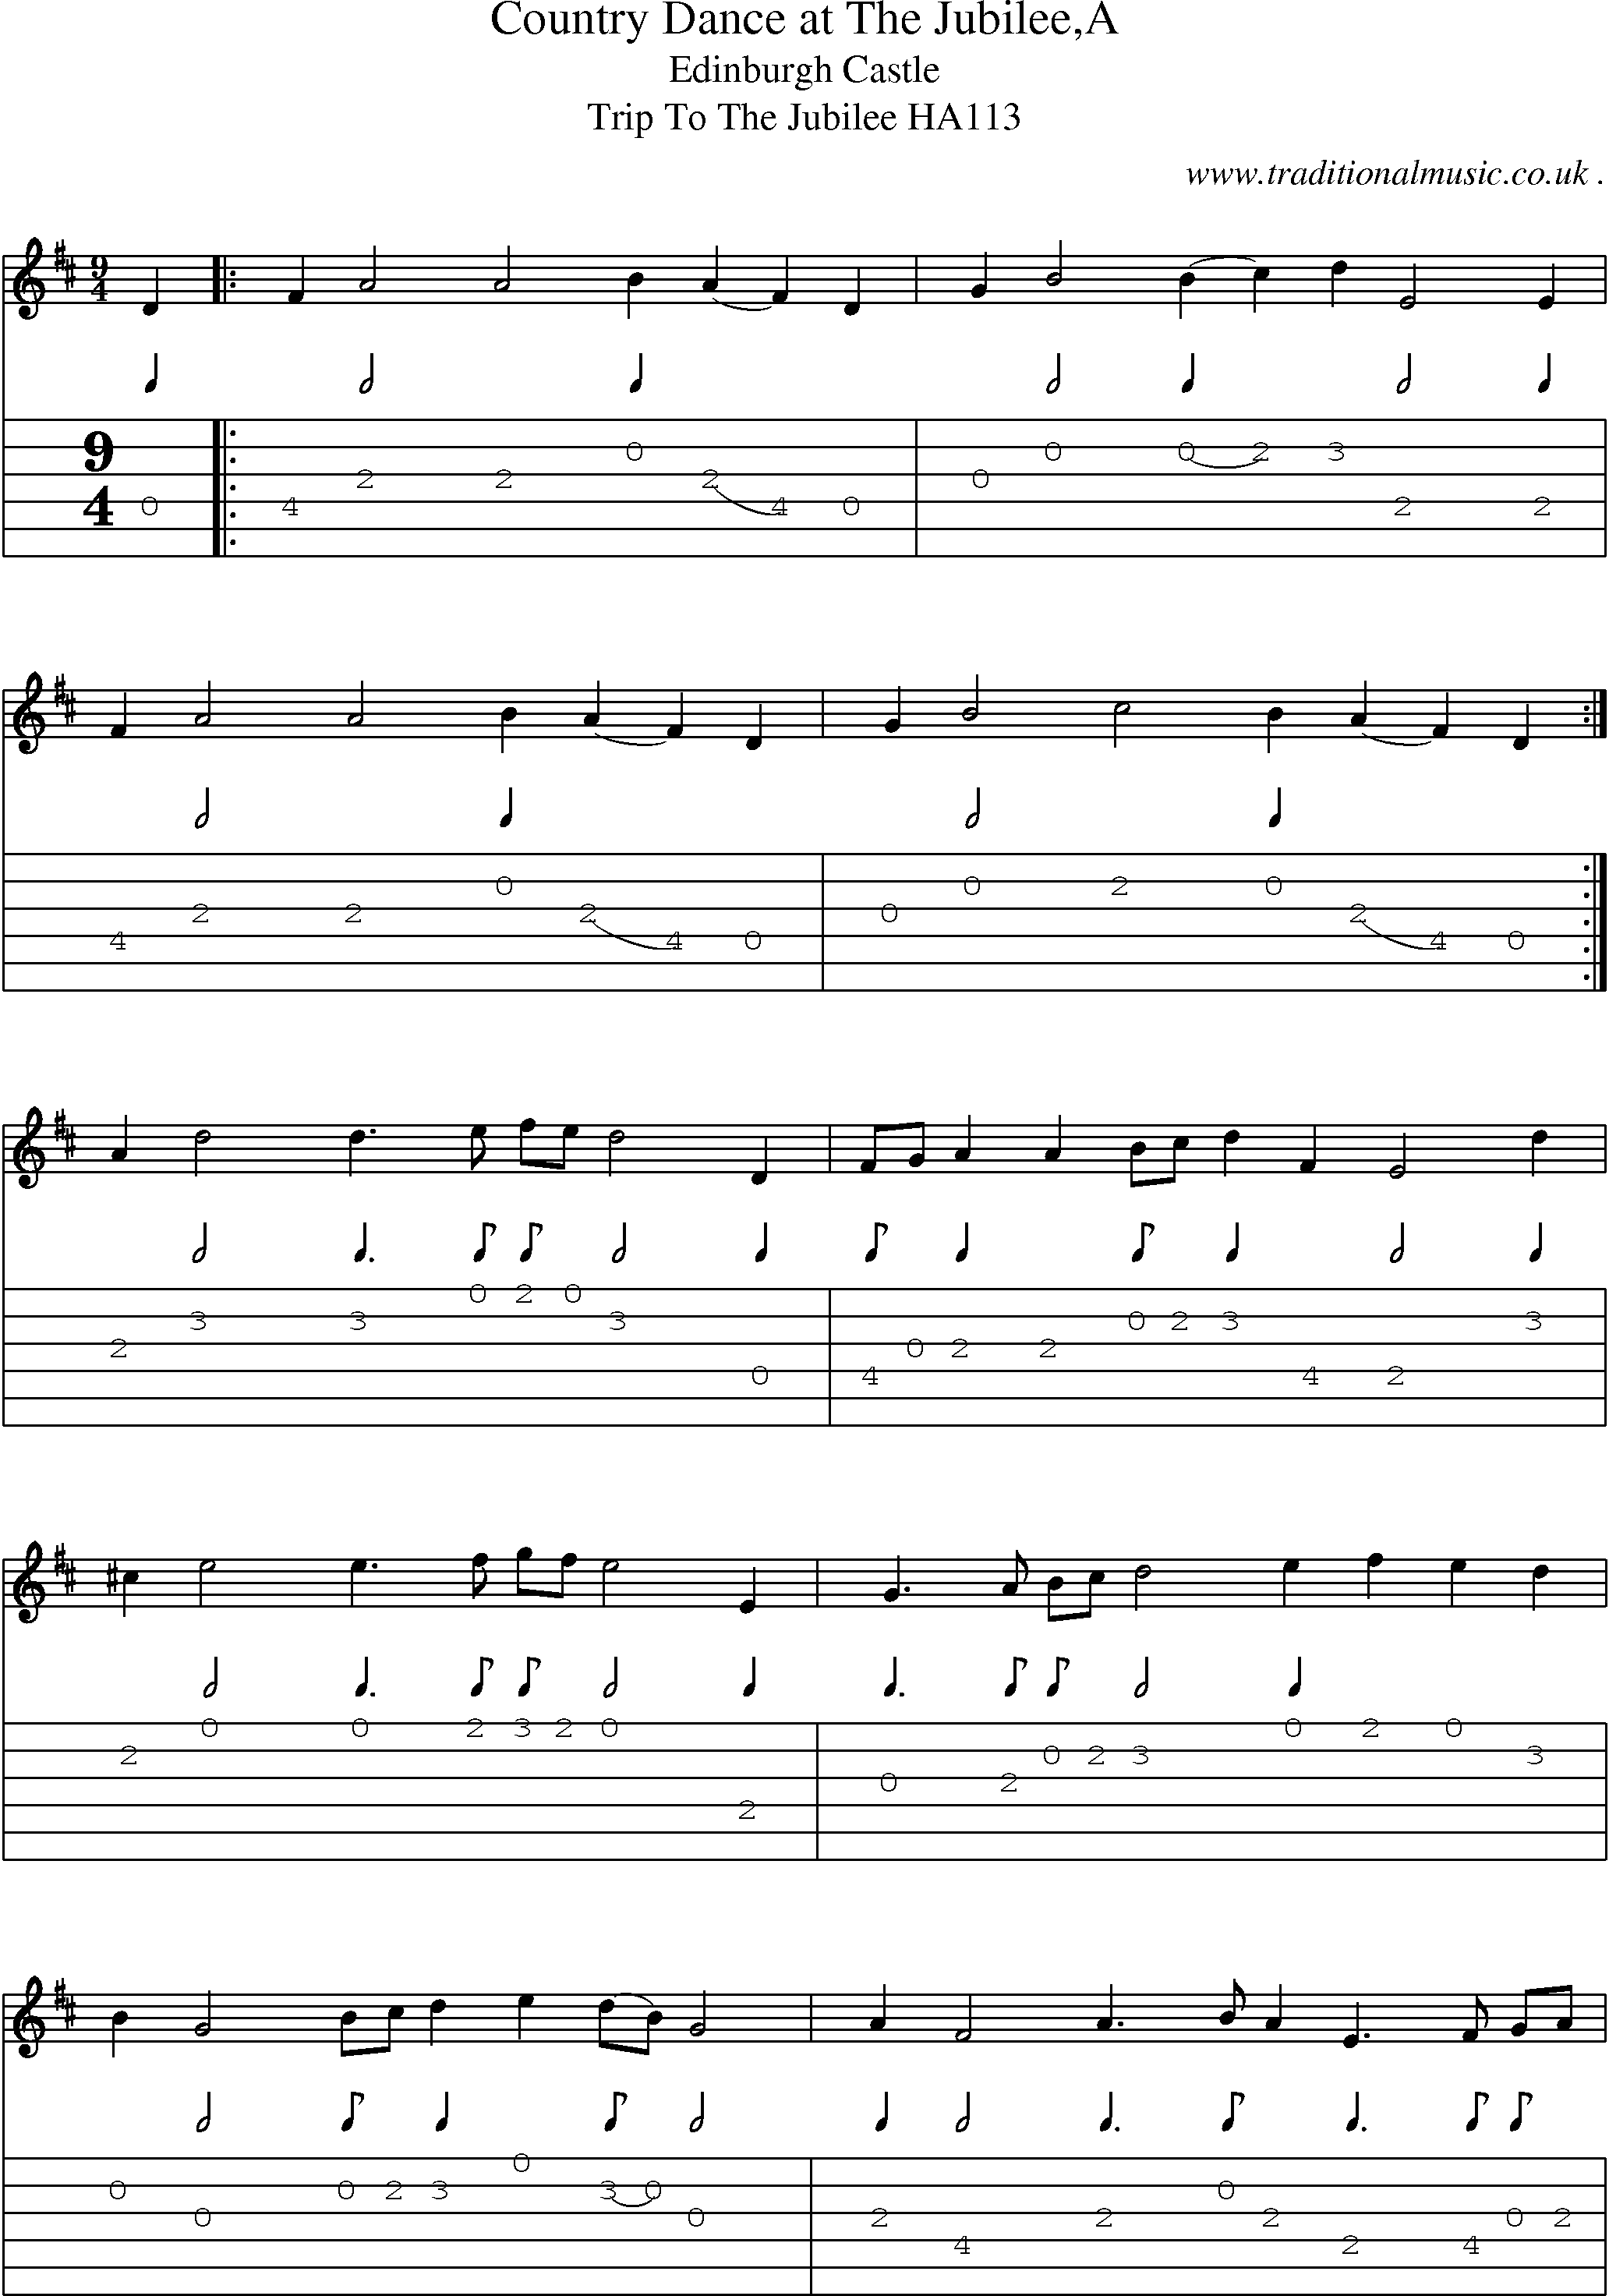 Sheet-Music and Guitar Tabs for Country Dance At The Jubileea